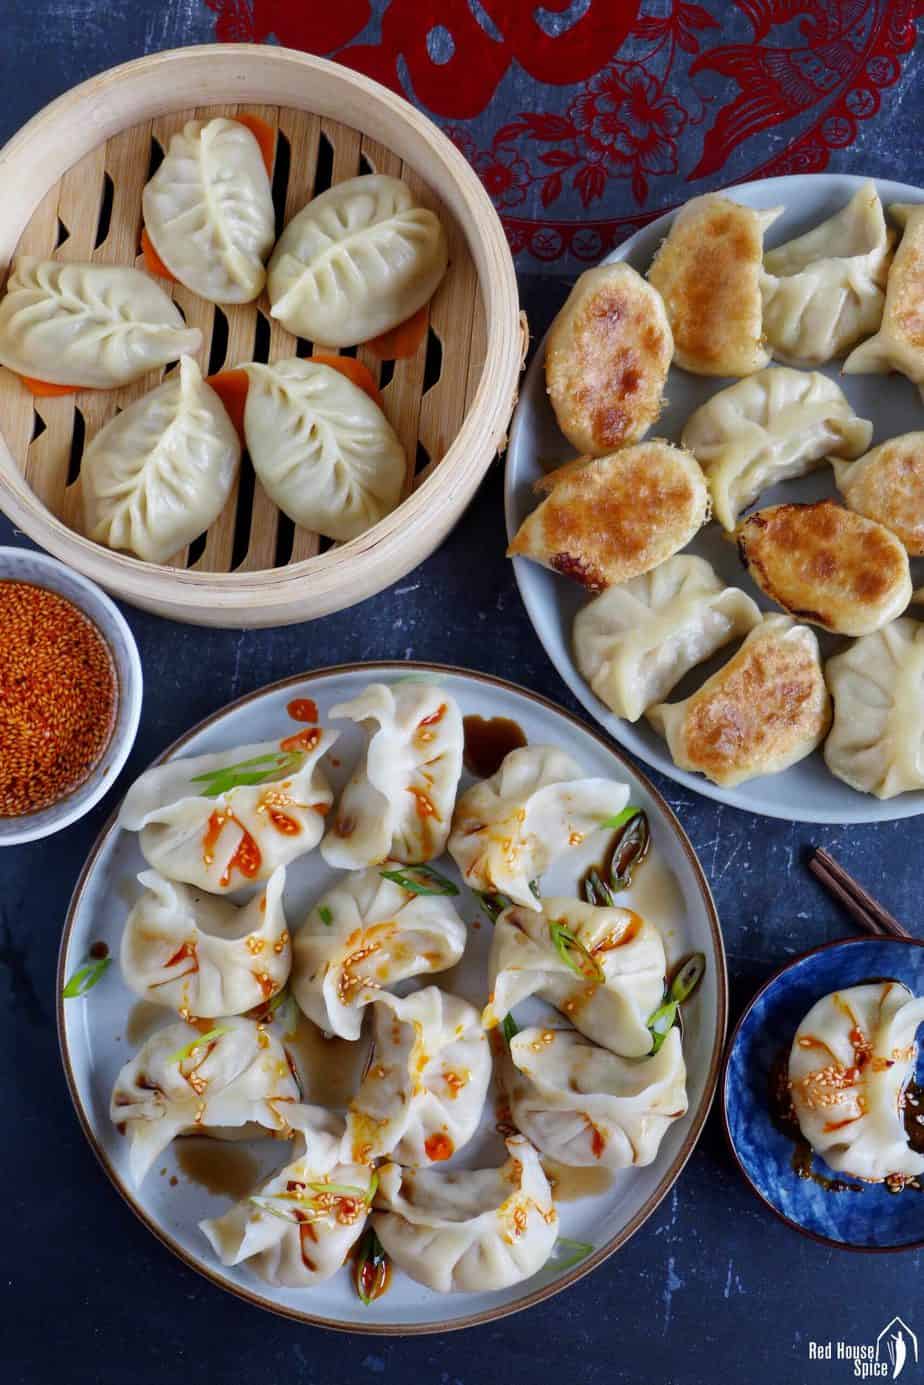 Chinese dumplings cooked in three ways: boiled, pan-fried & steamed